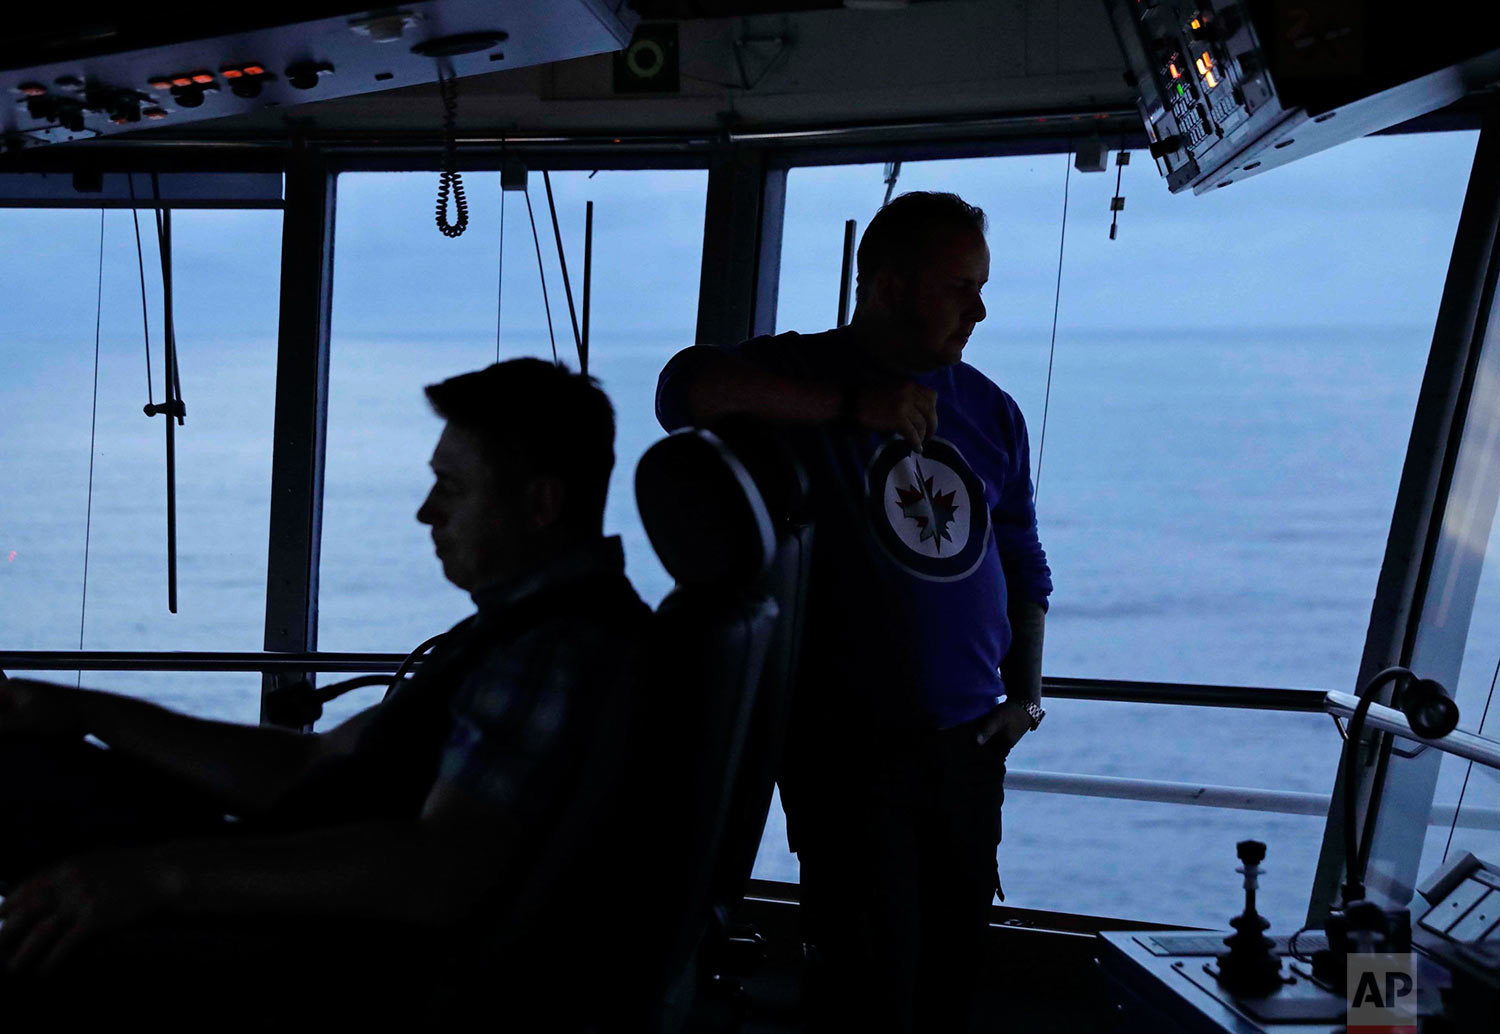  In this Thursday, July 6, 2017 photo, first officer Jukka Vuosalmi, right, and second officer Ilkka Alhoke look out from the bridge during a night shift while piloting the Finnish icebreaker MSV Nordica as it sails the North Pacific Ocean to travers